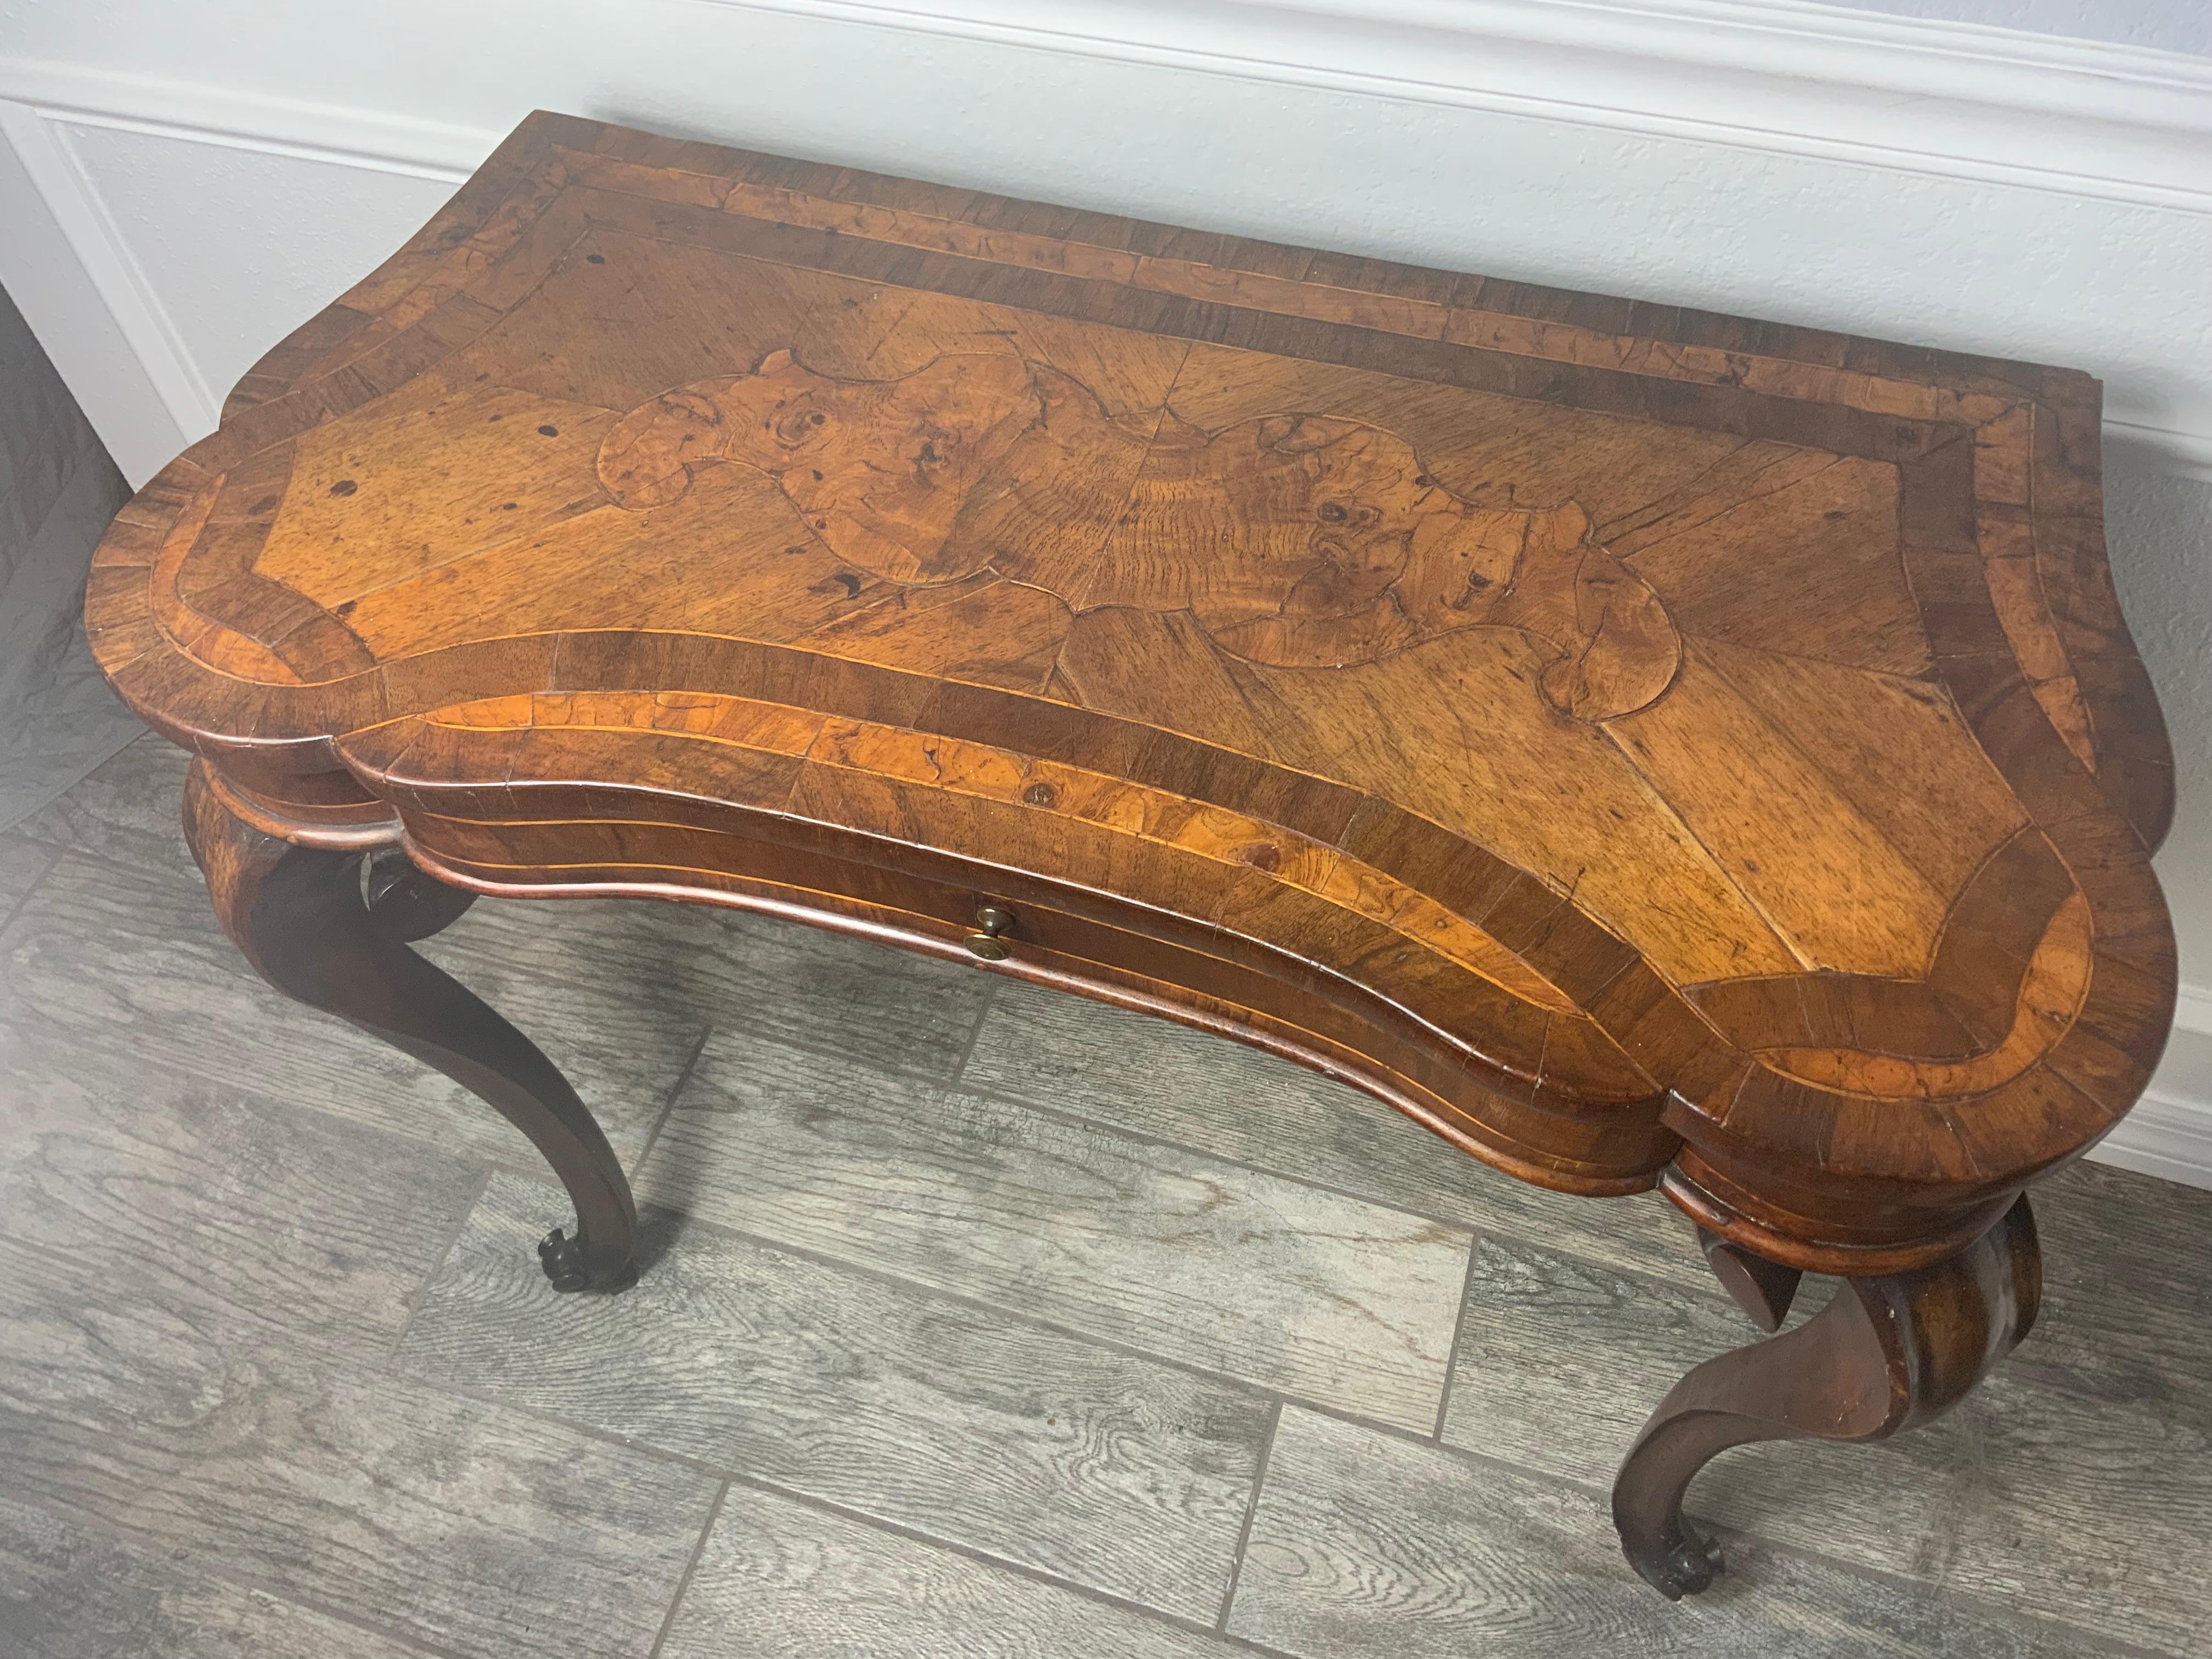 A Queen Anne era Walnut writing table, with bordered edge and book matched burl walnut veneer with mixed wood inlays to the top with rounded corners to the front, shaped inlay apron, raised on large scrolled carved cabriole legs on a raised carved